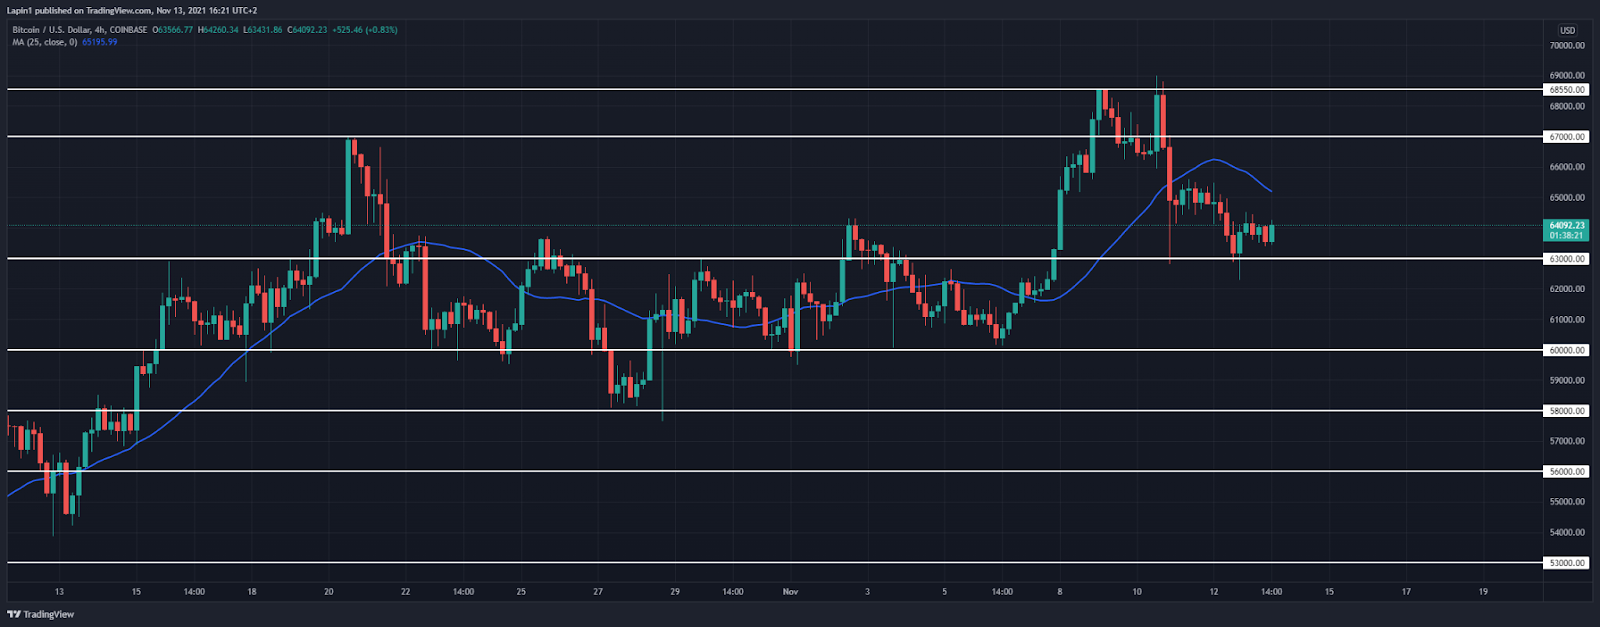 Bitcoin Price Analysis: BTC retests $63,000, ready to move higher again?